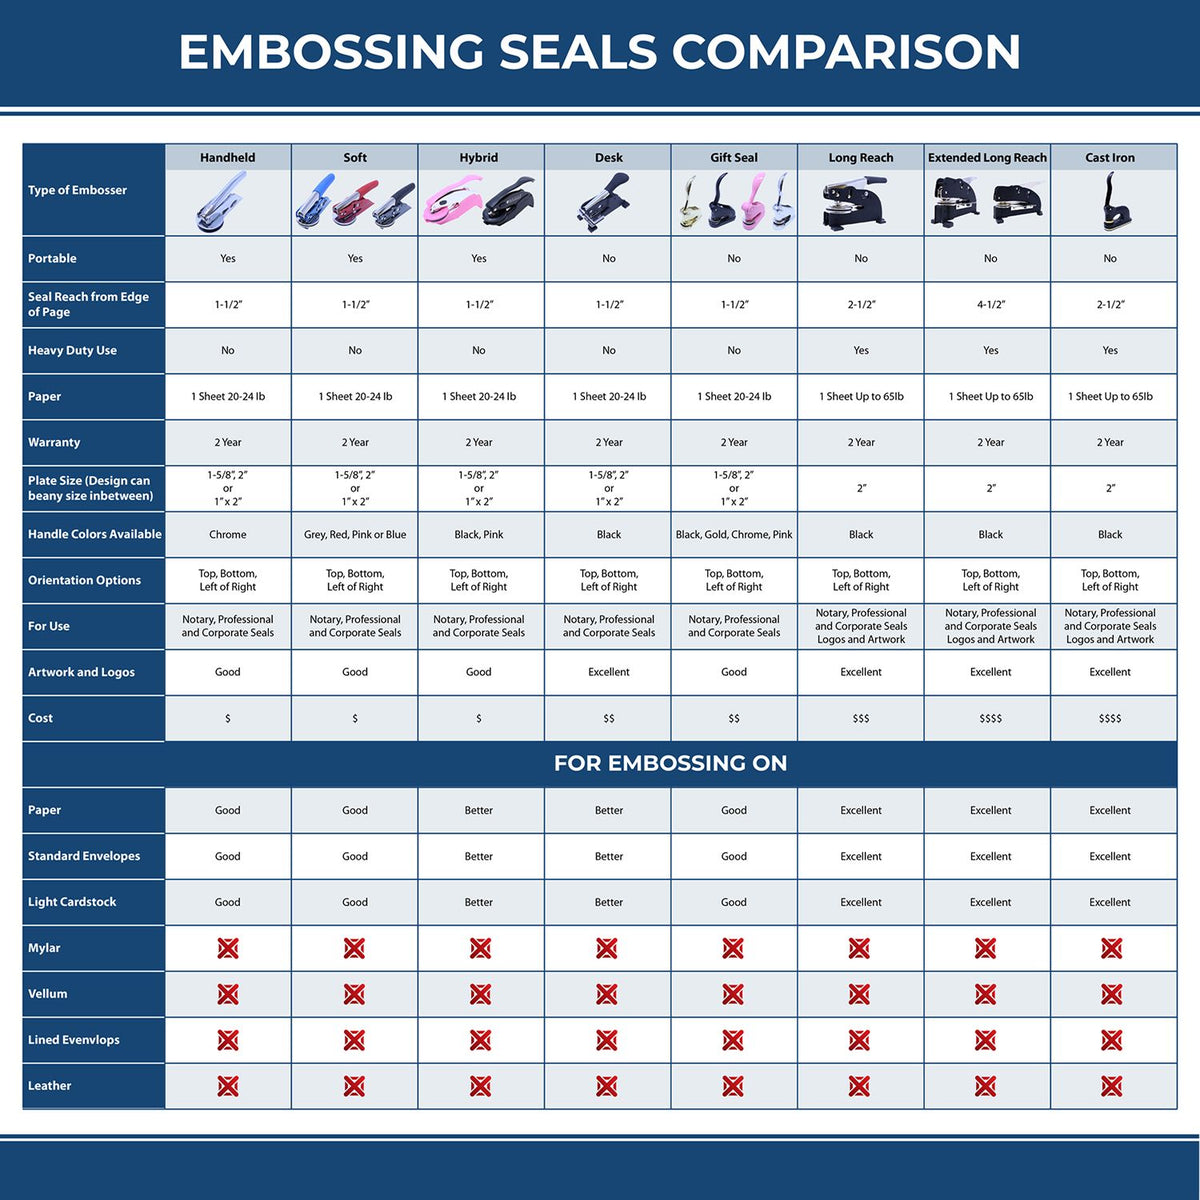 A comparison chart for the different types of mount models available for the Soft Connecticut Professional Engineer Seal.